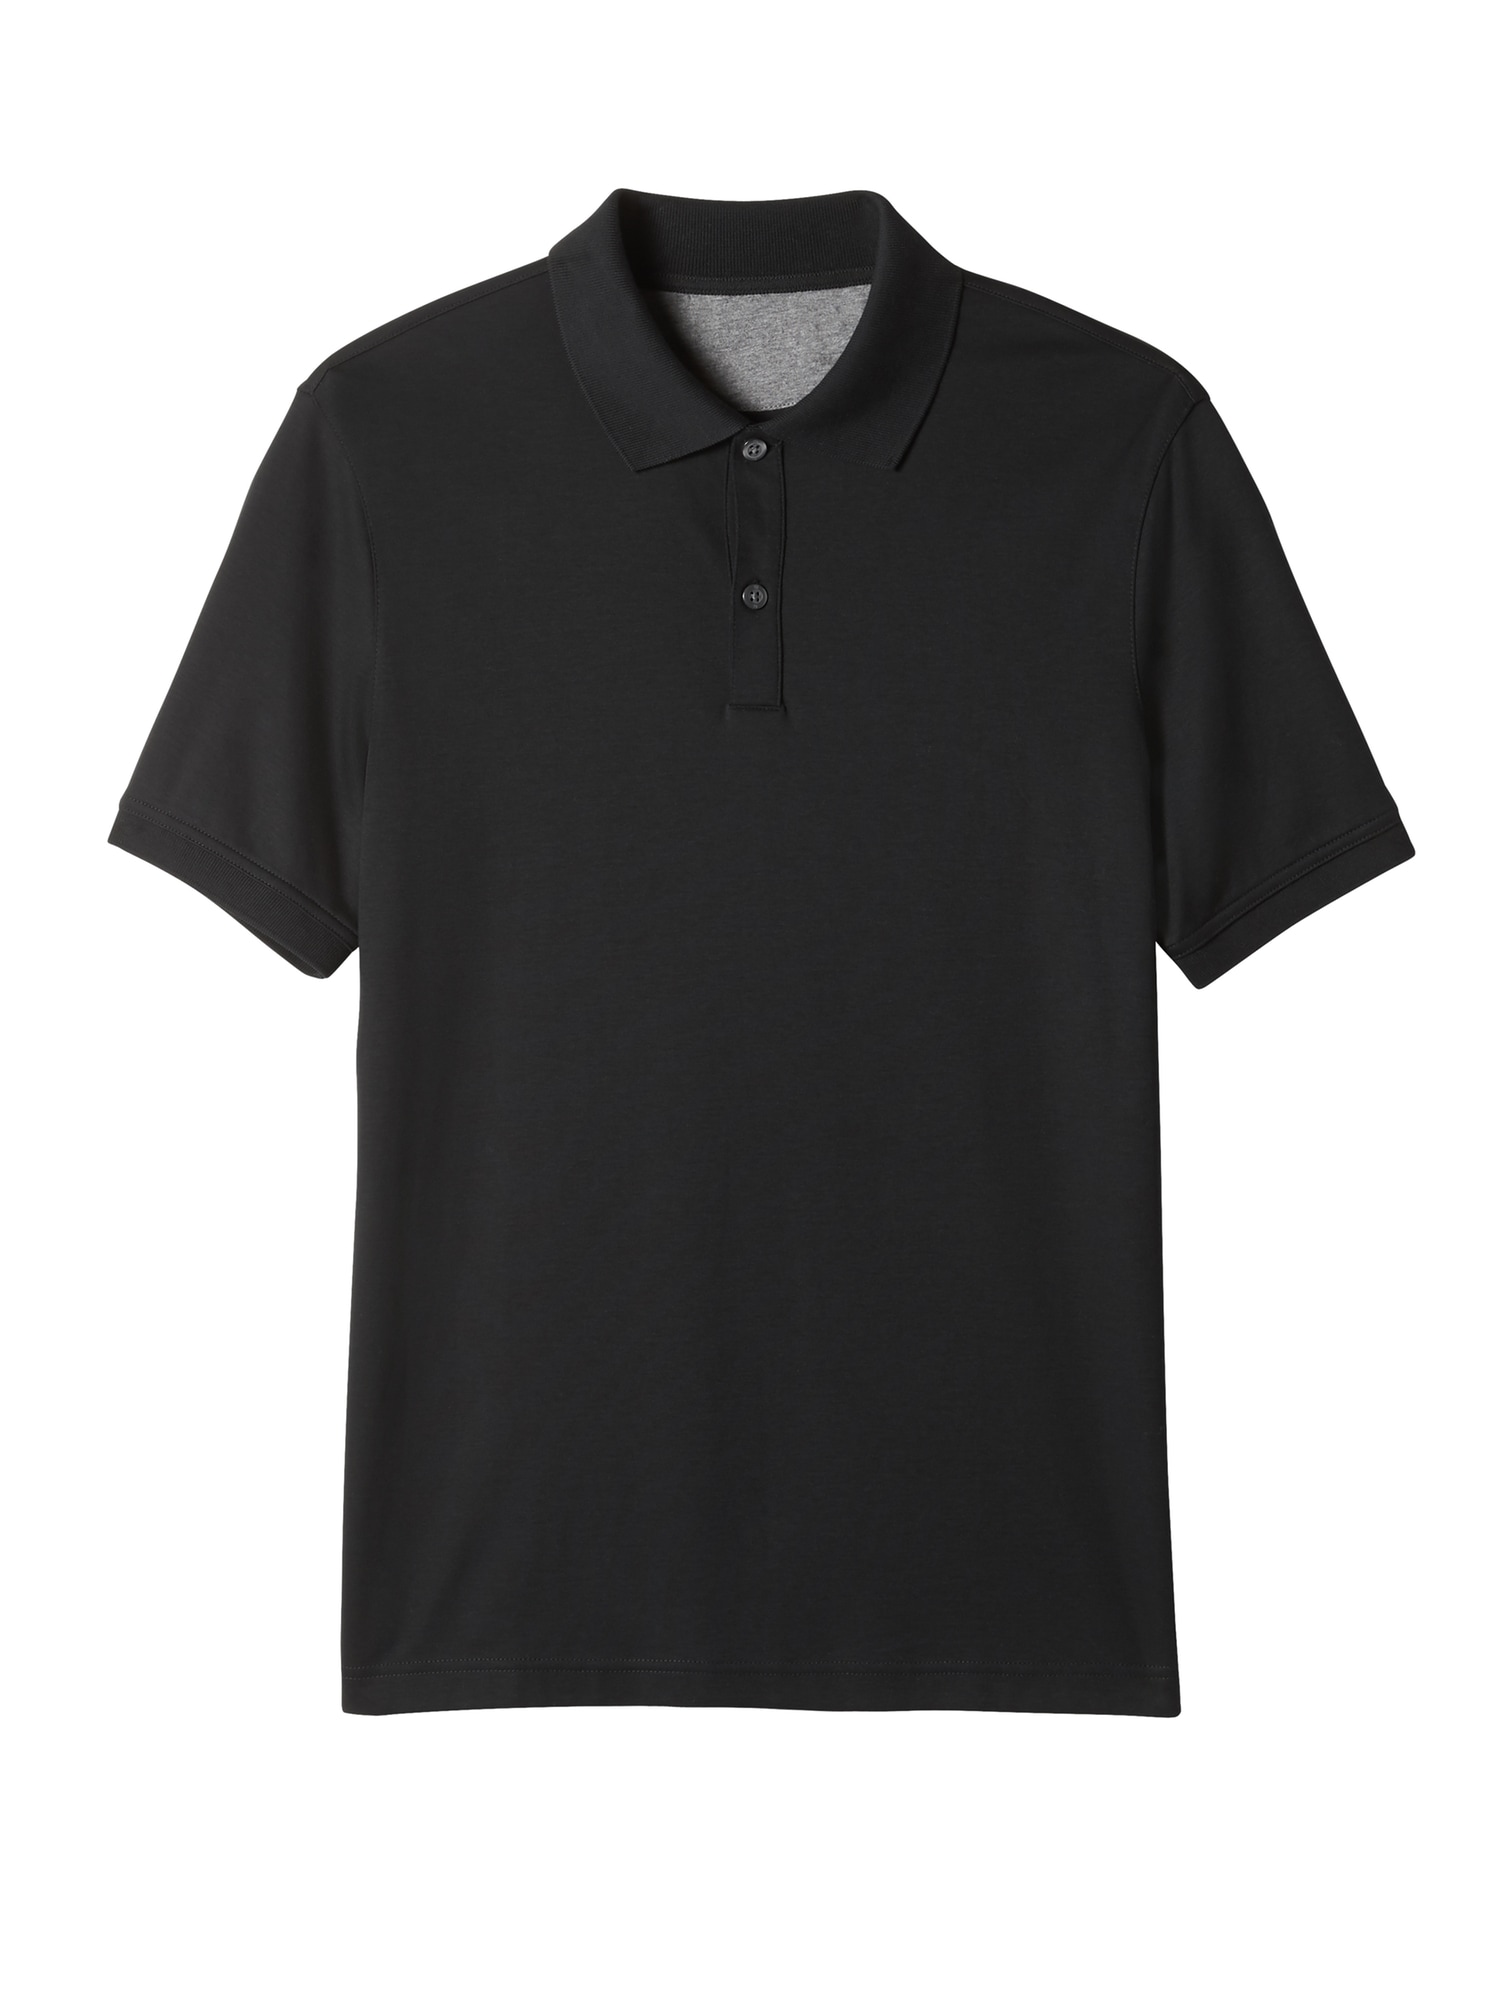 Most Popular Polo T Shirt Brands - Prism Contractors & Engineers